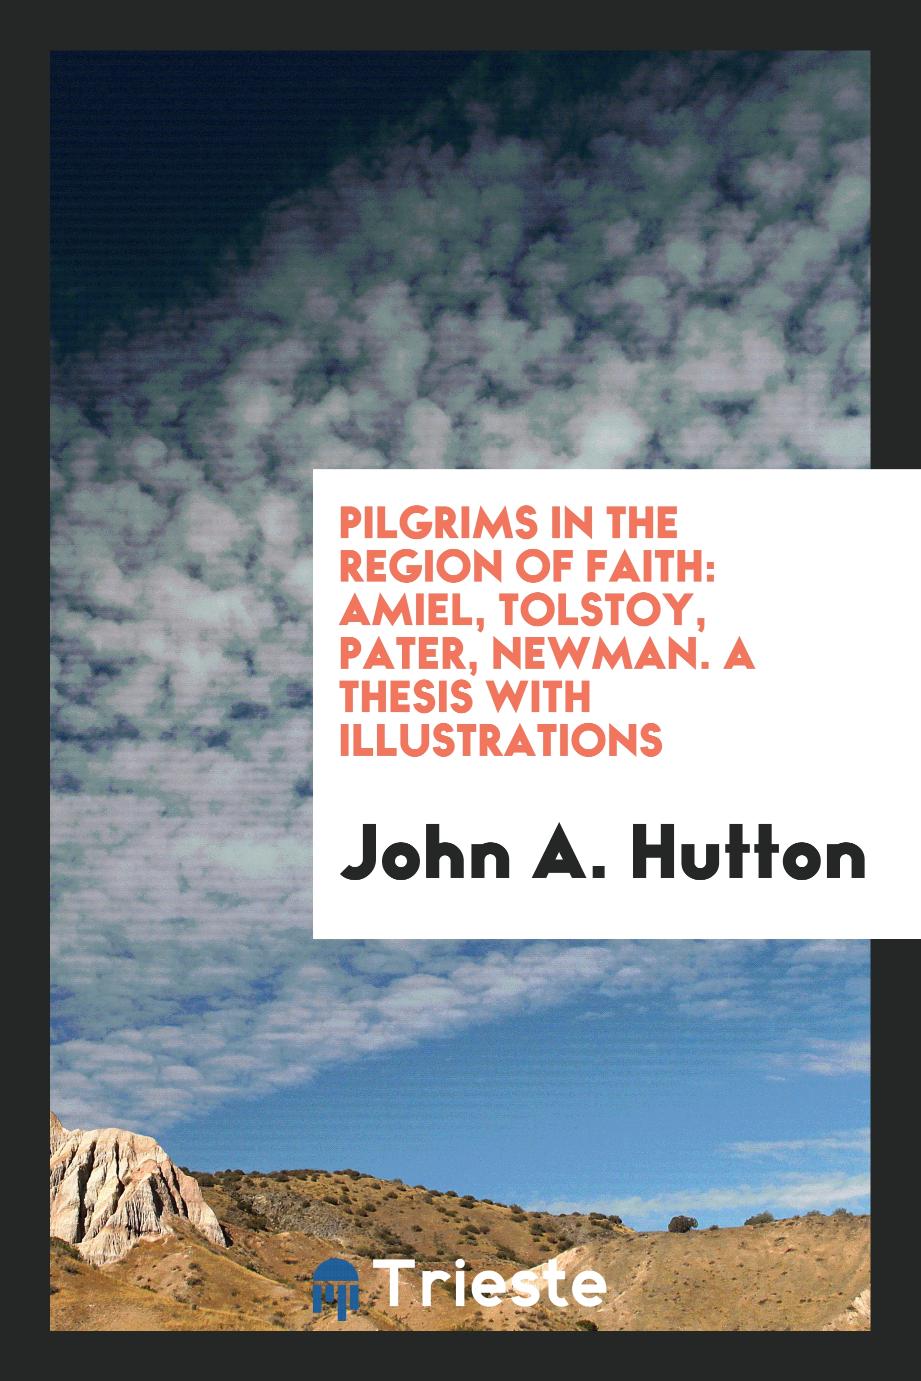 Pilgrims in the Region of Faith: Amiel, Tolstoy, Pater, Newman. A Thesis with Illustrations